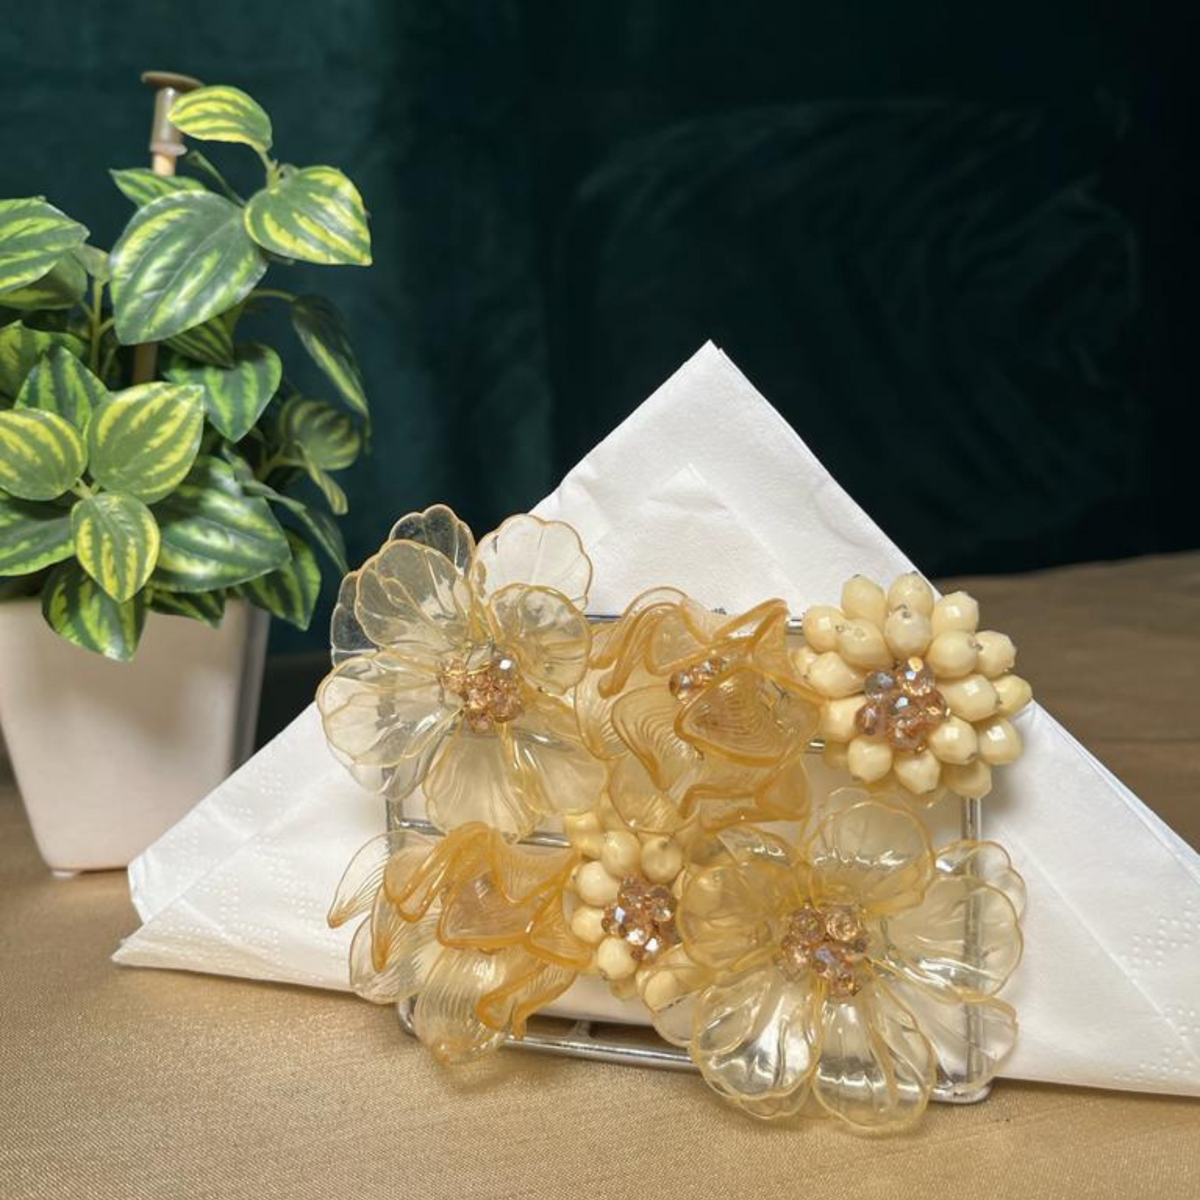 The LuxeLife Yellow Floral Tissue Holder